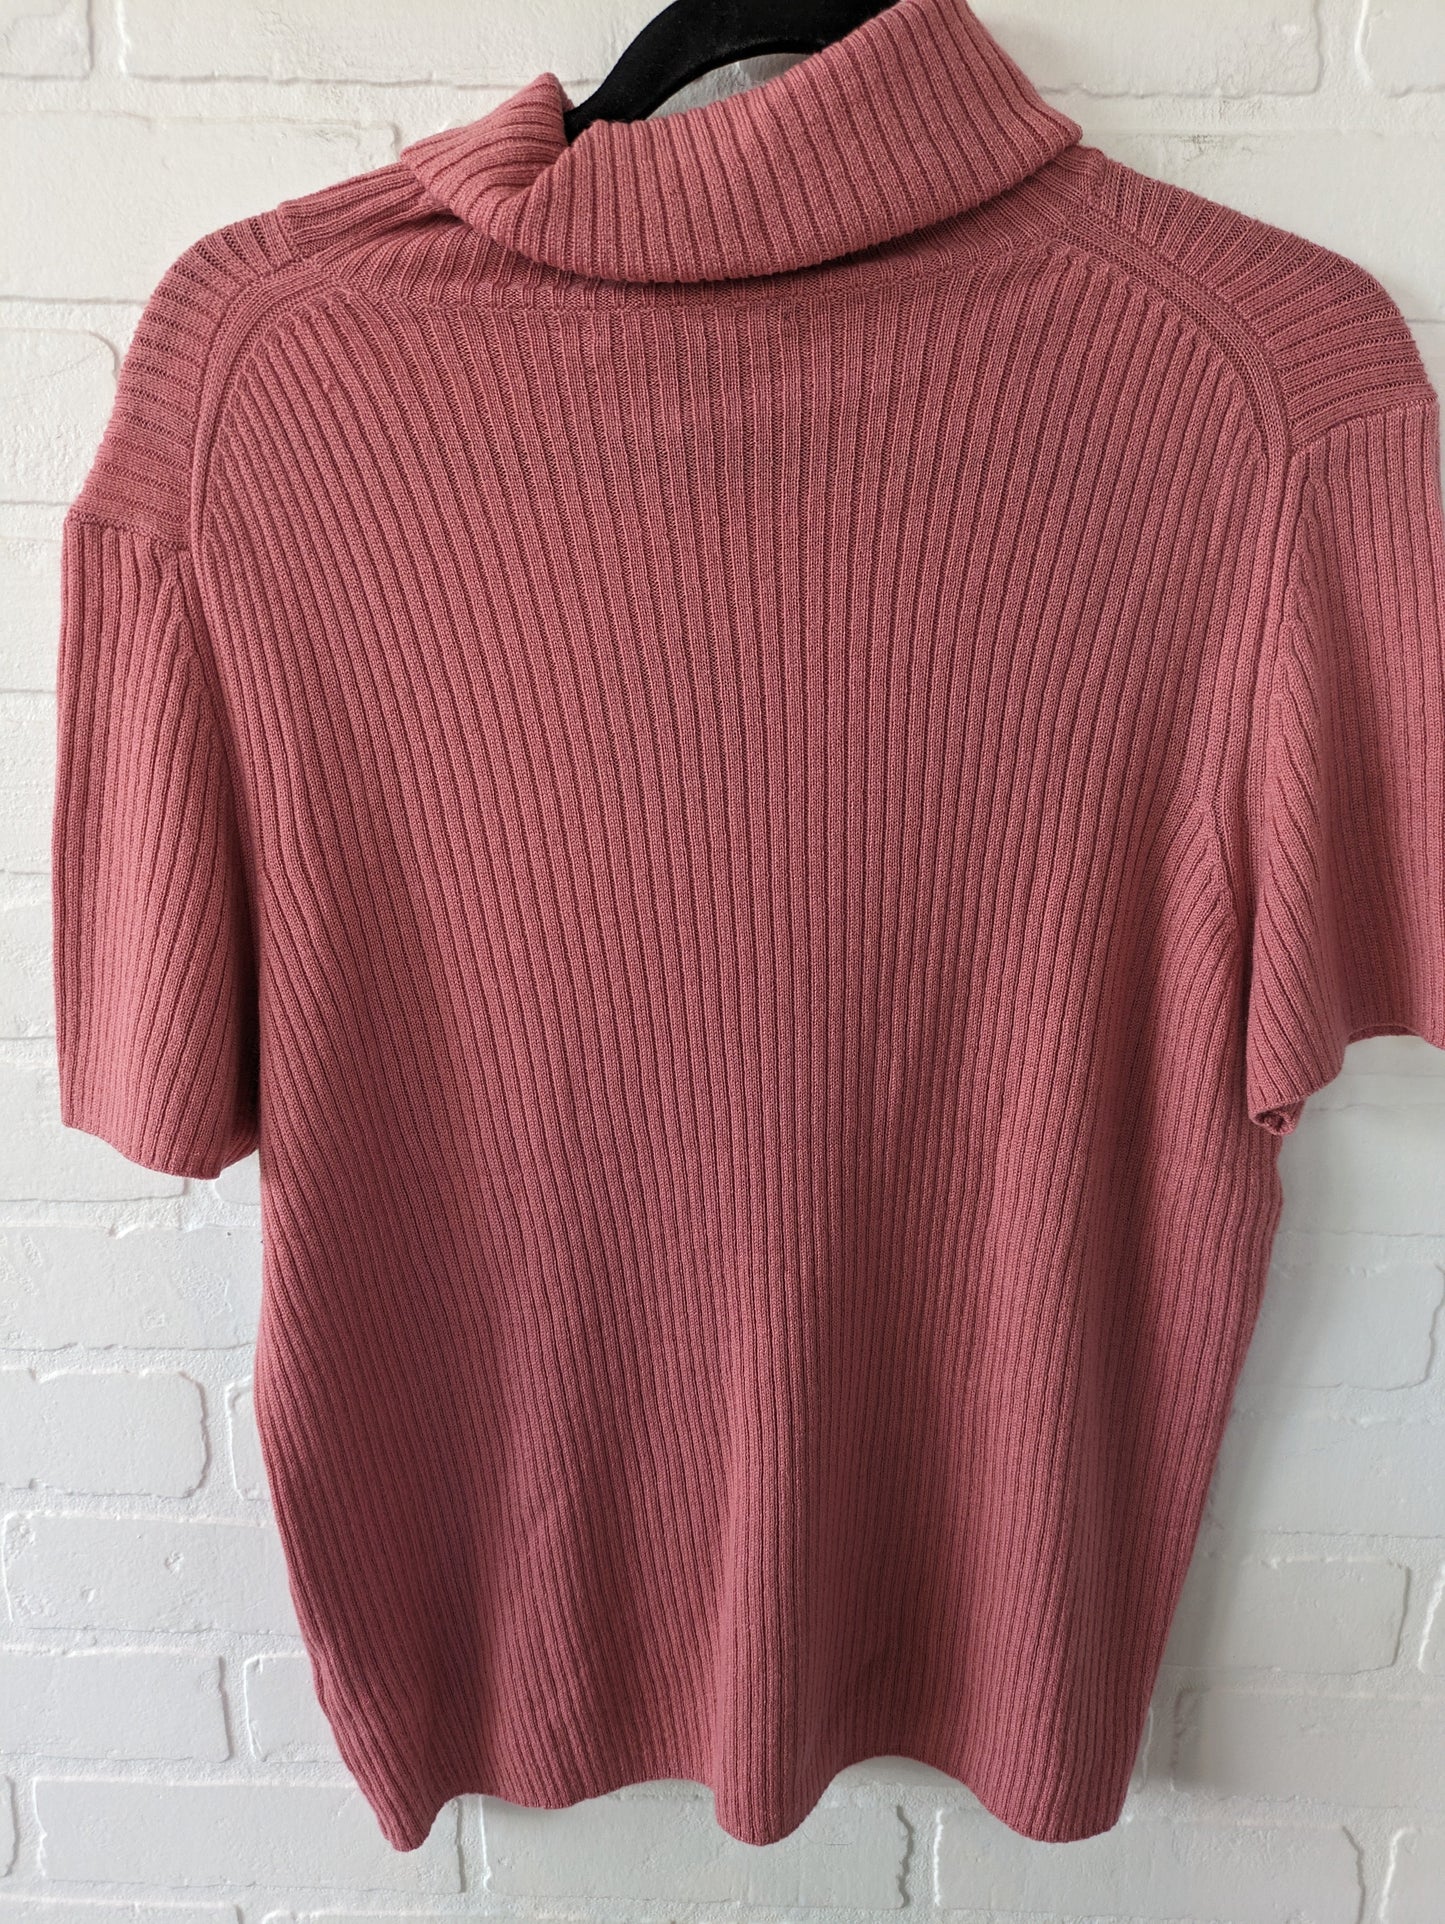 Sweater Short Sleeve By Saks Fifth Avenue  Size: M